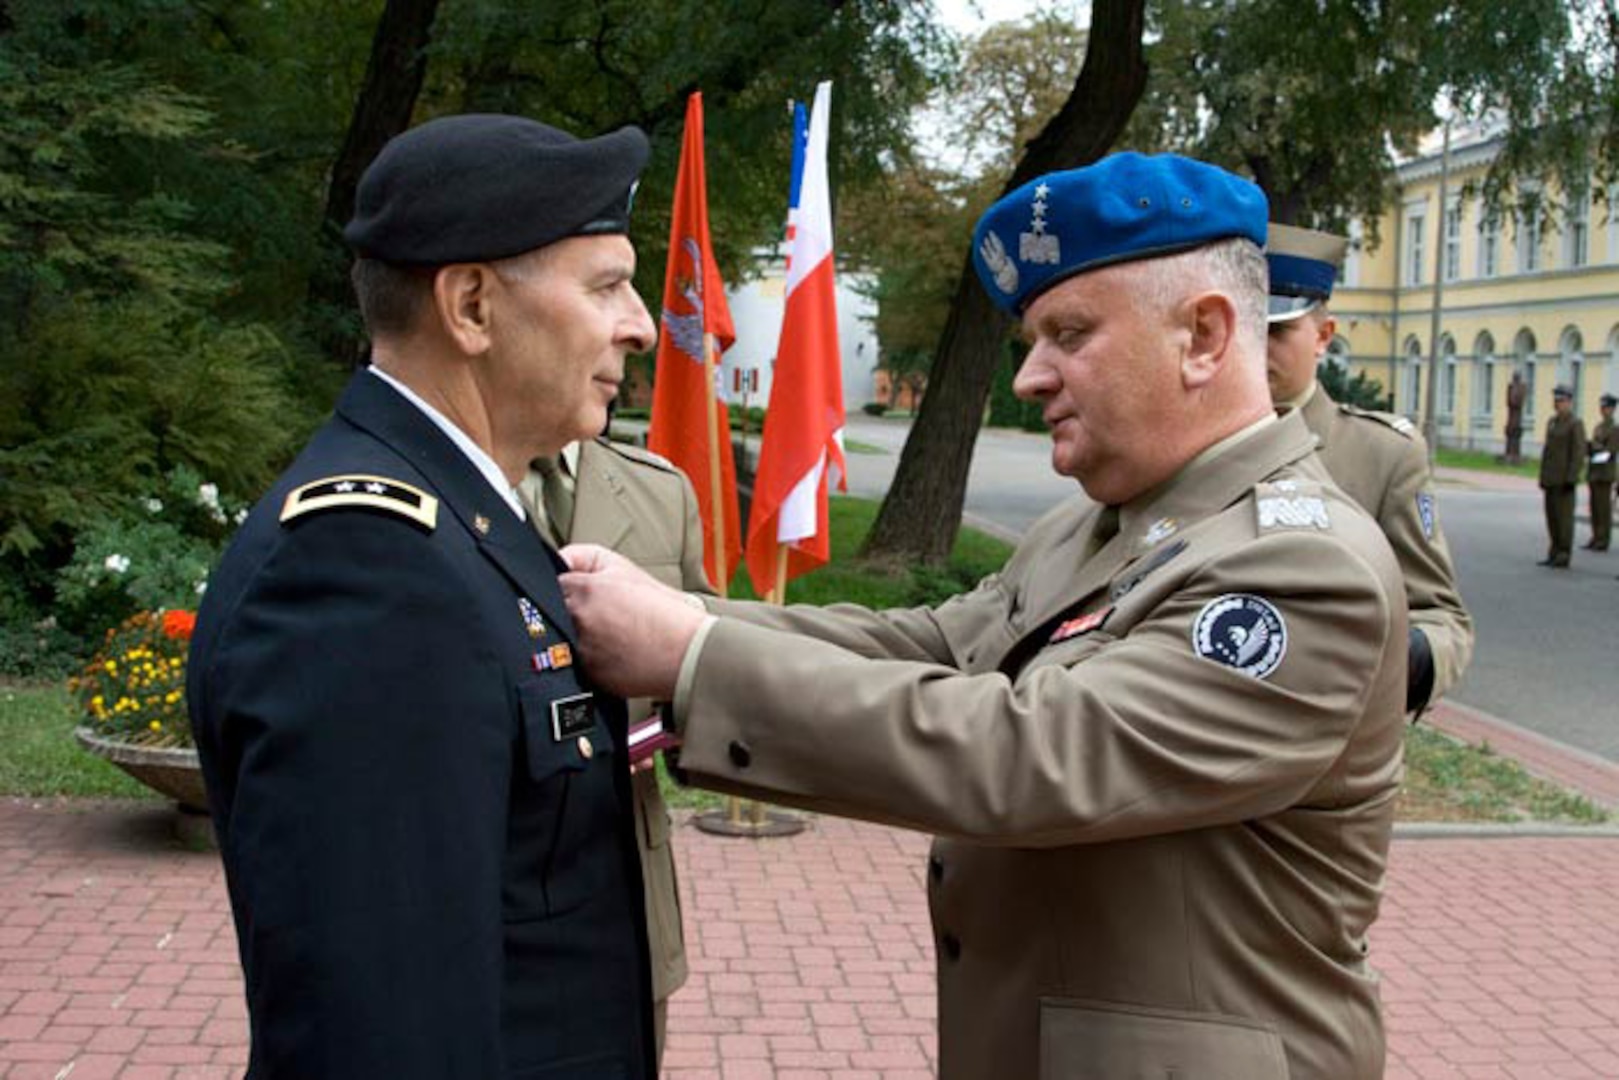 Army Maj. Gen. William Enyart, the adjutant general of the Illinois National Guard, receives the Polish Army Medal from Polish Land Forces Commander Lieutenant General Zbigniew Glowienka on Sept. 23. 2011. The Illinois National Guard and Poland have been partners through the National Guard State Partnership Program since 1993.